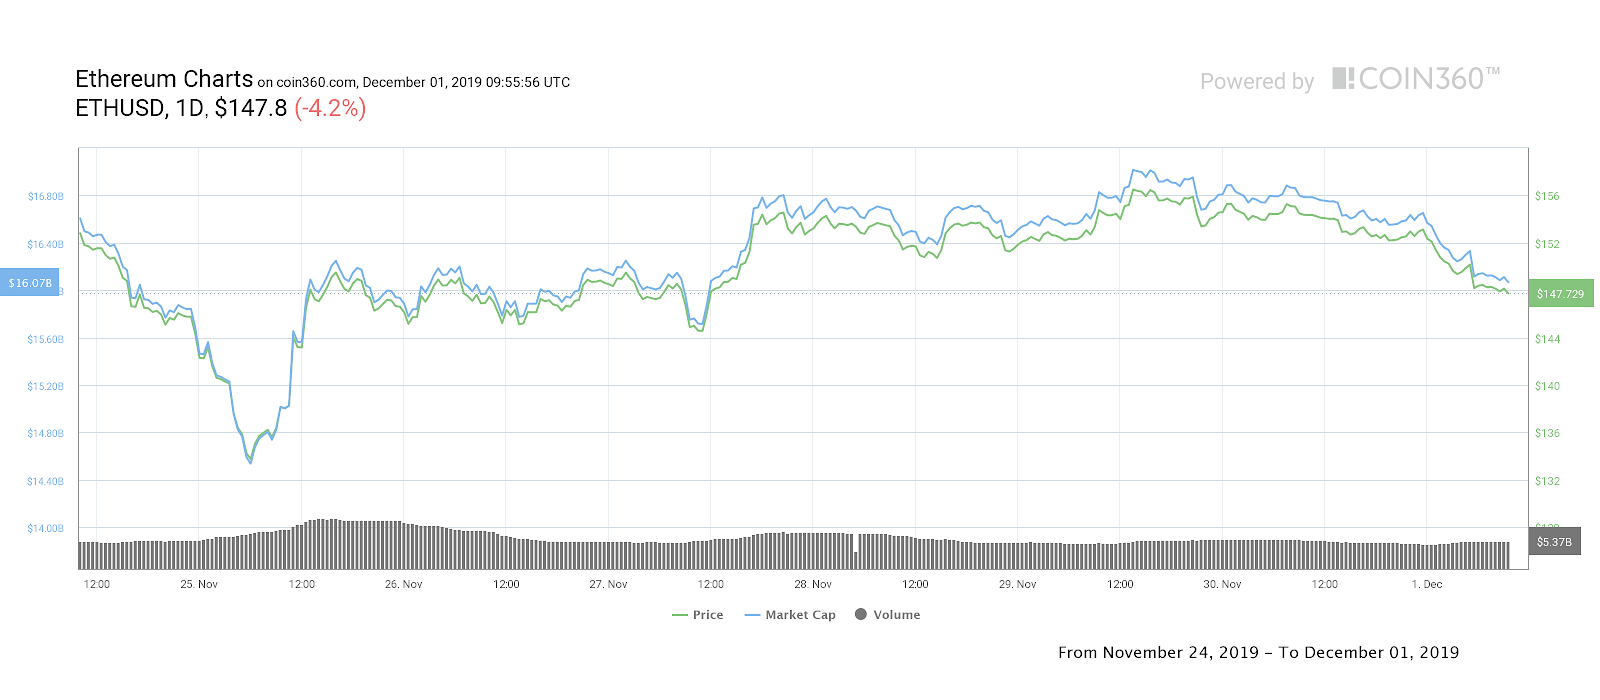 Ether seven-day price chart